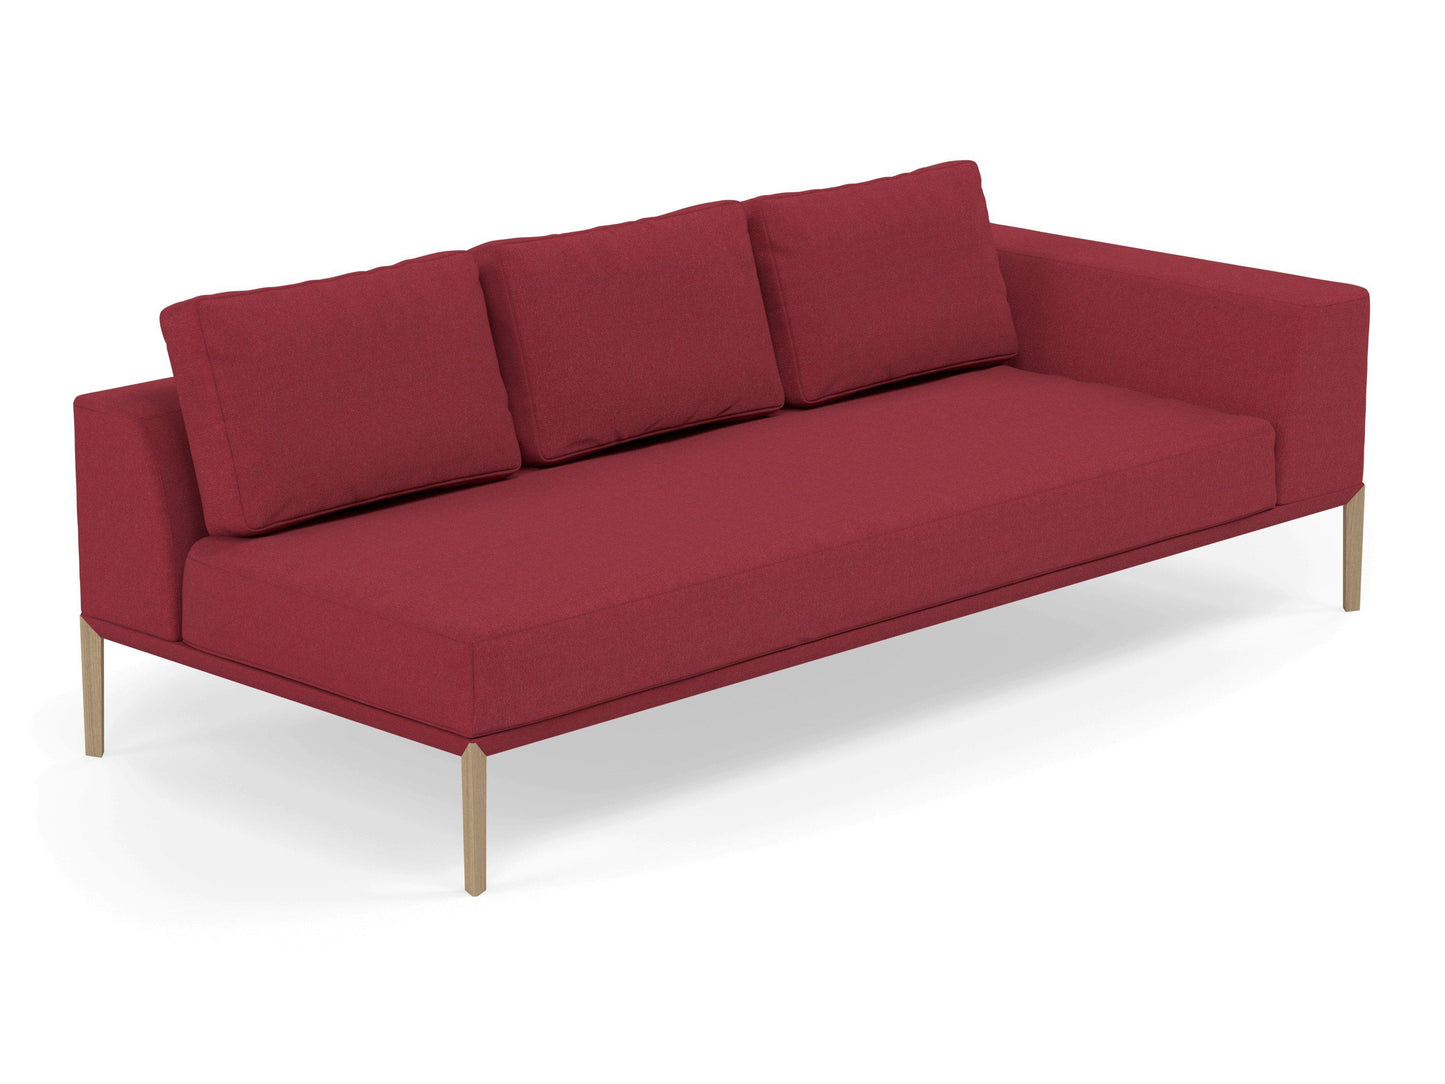 Modern 3 Seater Chaise Lounge Style Sofa with Left Armrest in Rasberry Red Fabric-Distinct Designs (London) Ltd